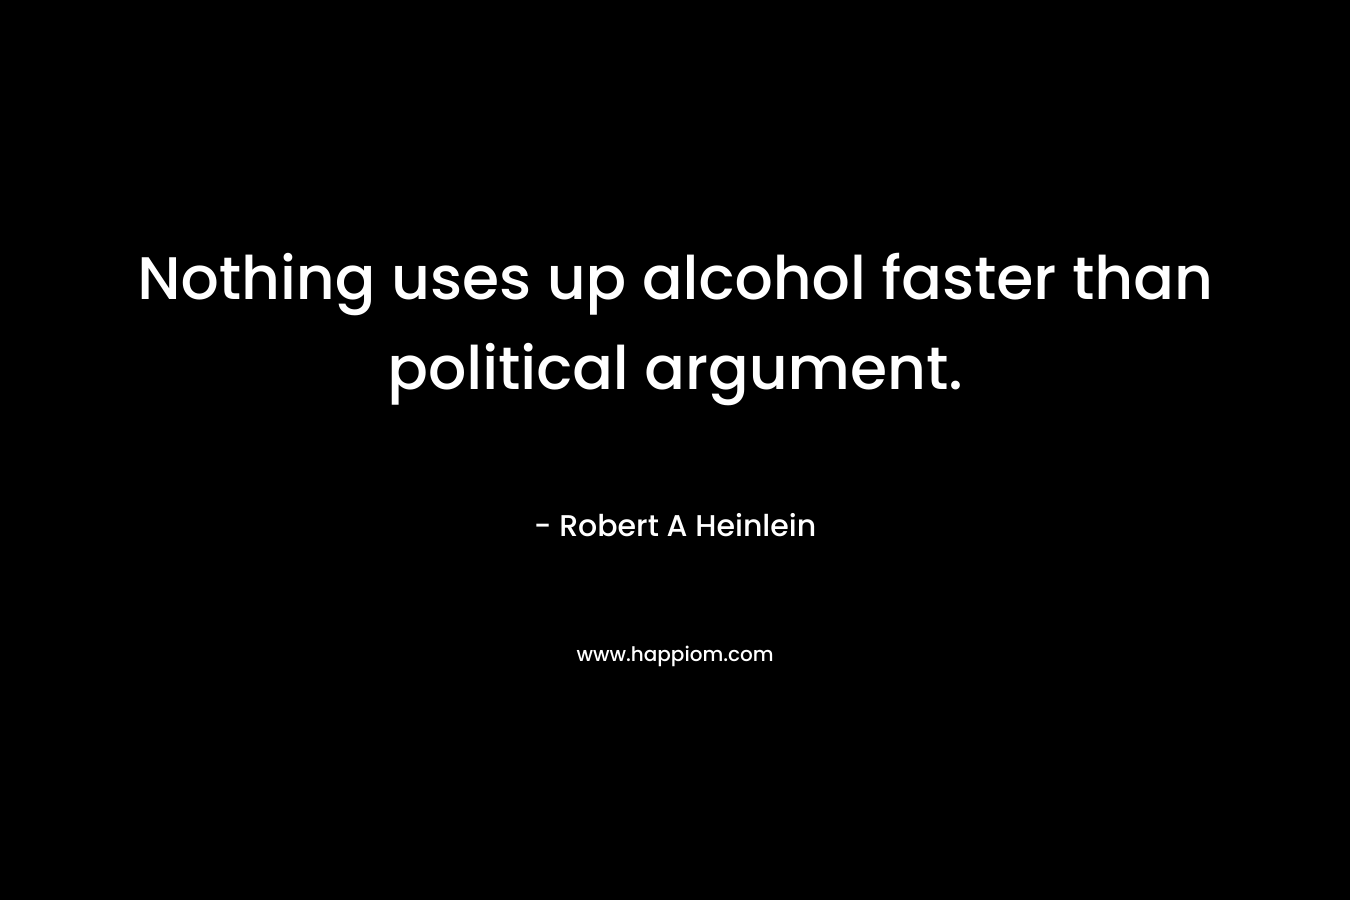 Nothing uses up alcohol faster than political argument.